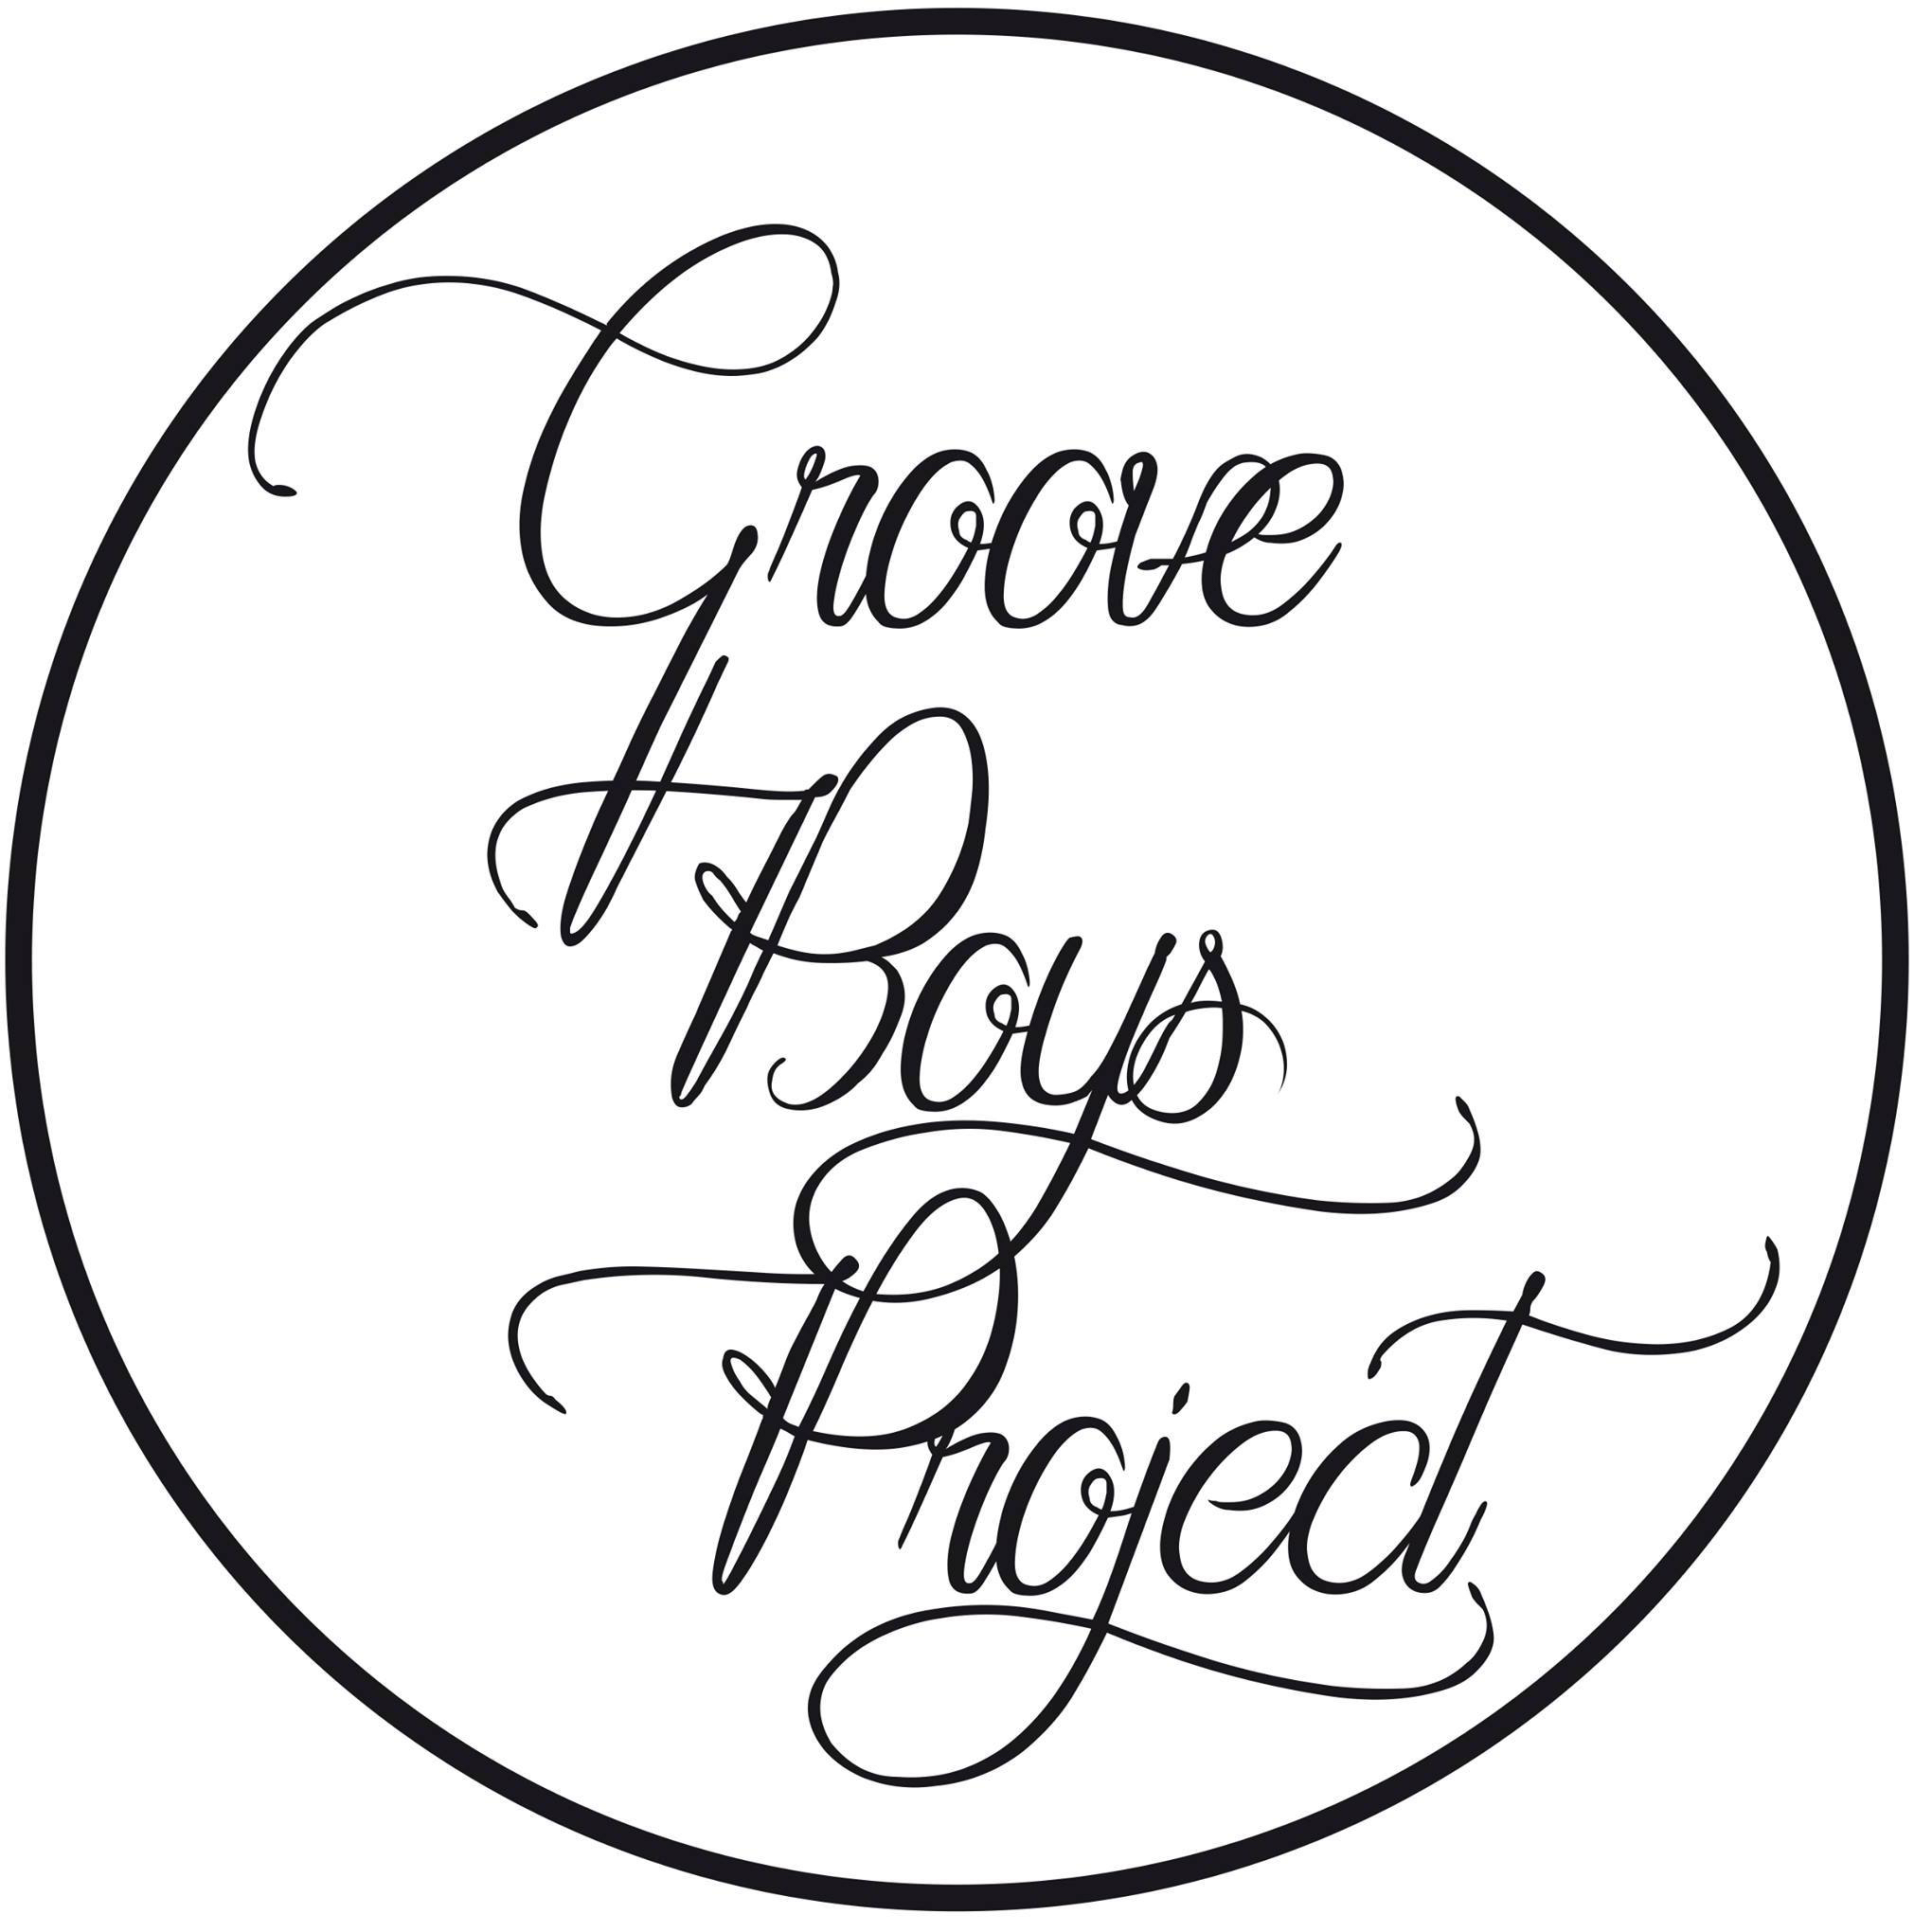 Groove Boys Project